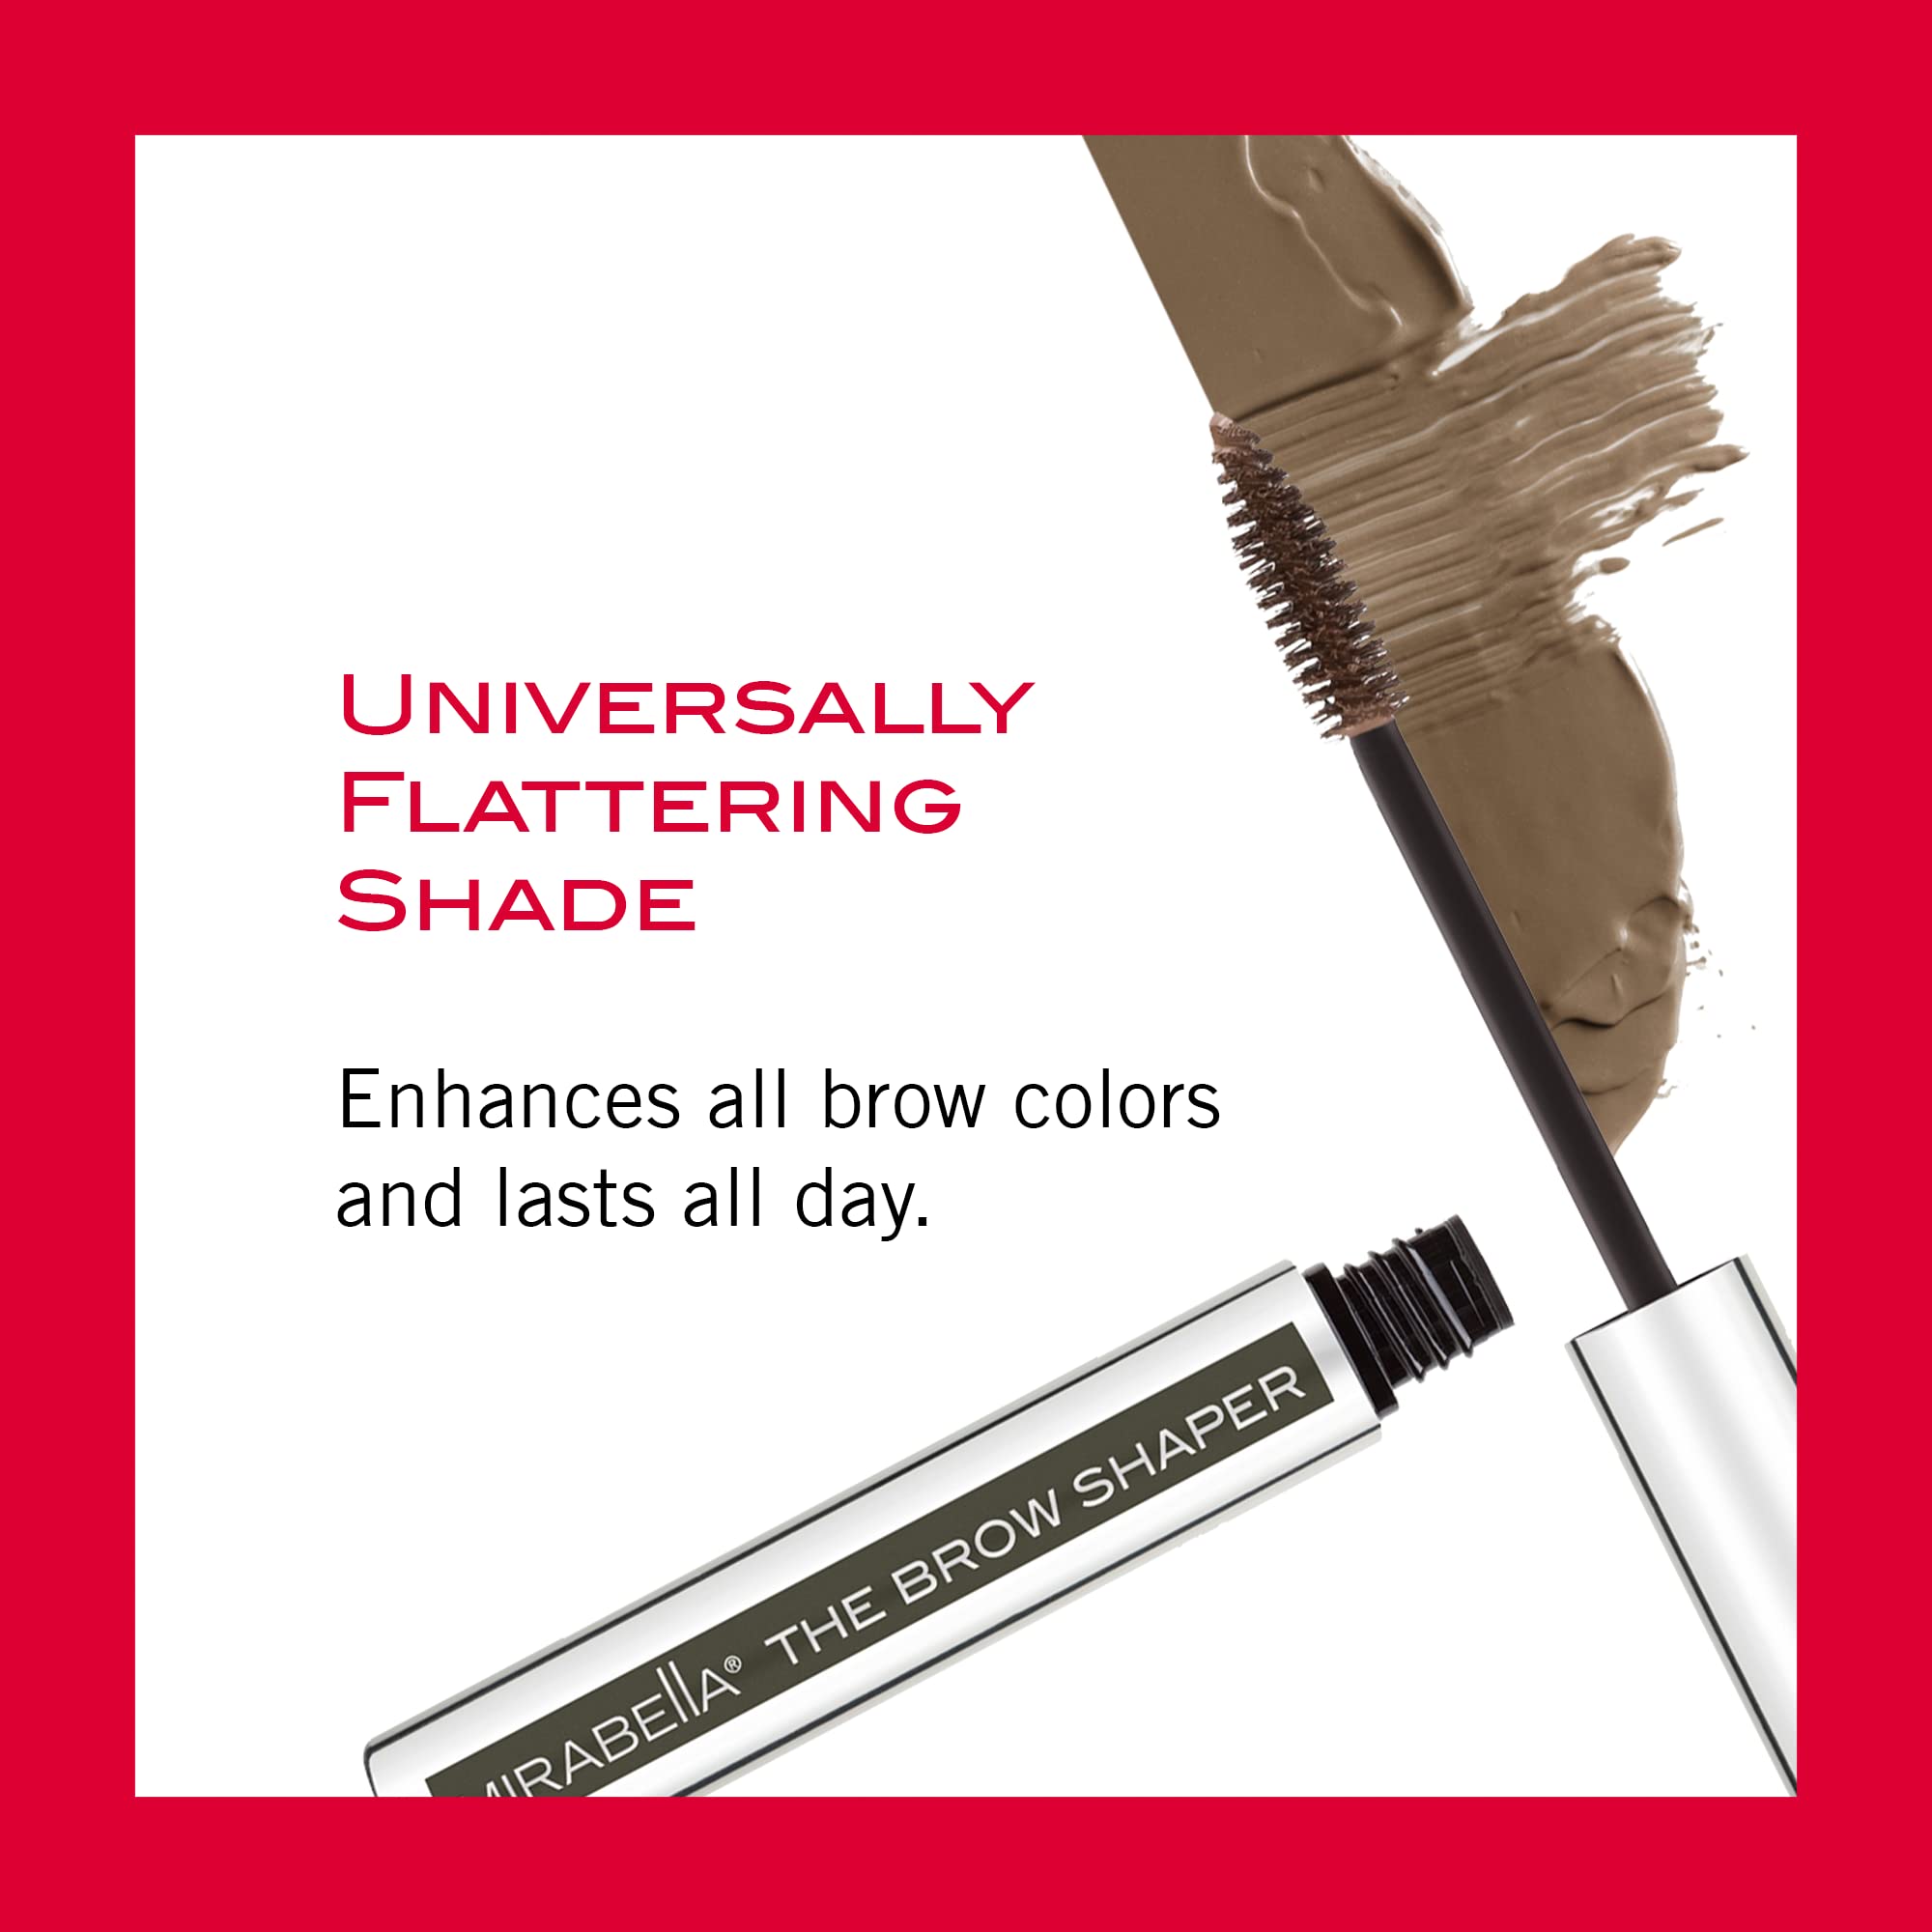 Mirabella Beauty Brow Shaper, Universal Shade - All-In-One Long-Lasting Eyebrow Gel Shapes, Defines, Grooms, Fills & Thickens Brows - Aloe & Vitamin B5 for Conditioning & Strengthening